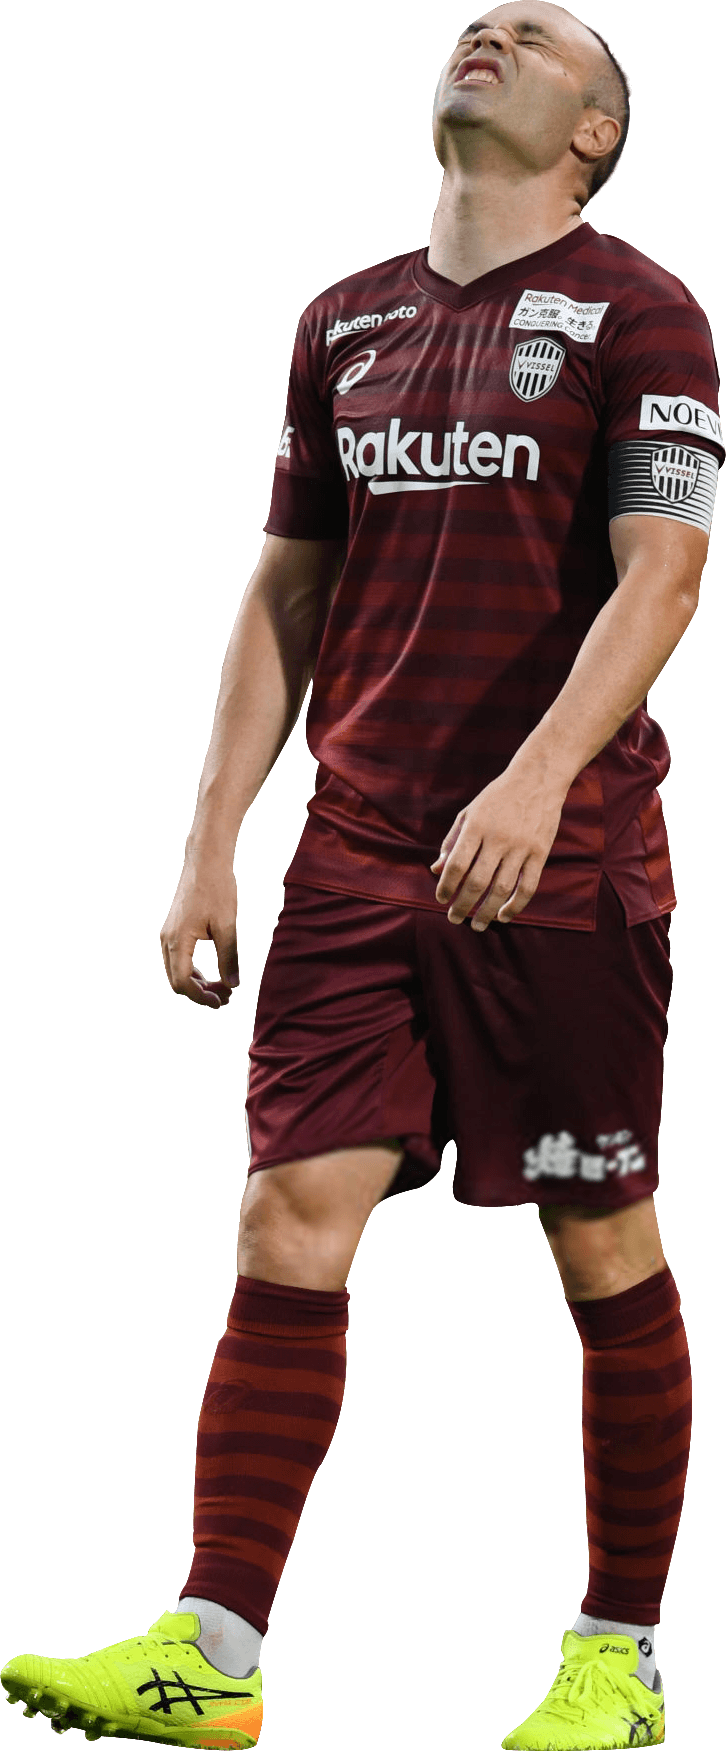 Andres Iniesta Transparent Images